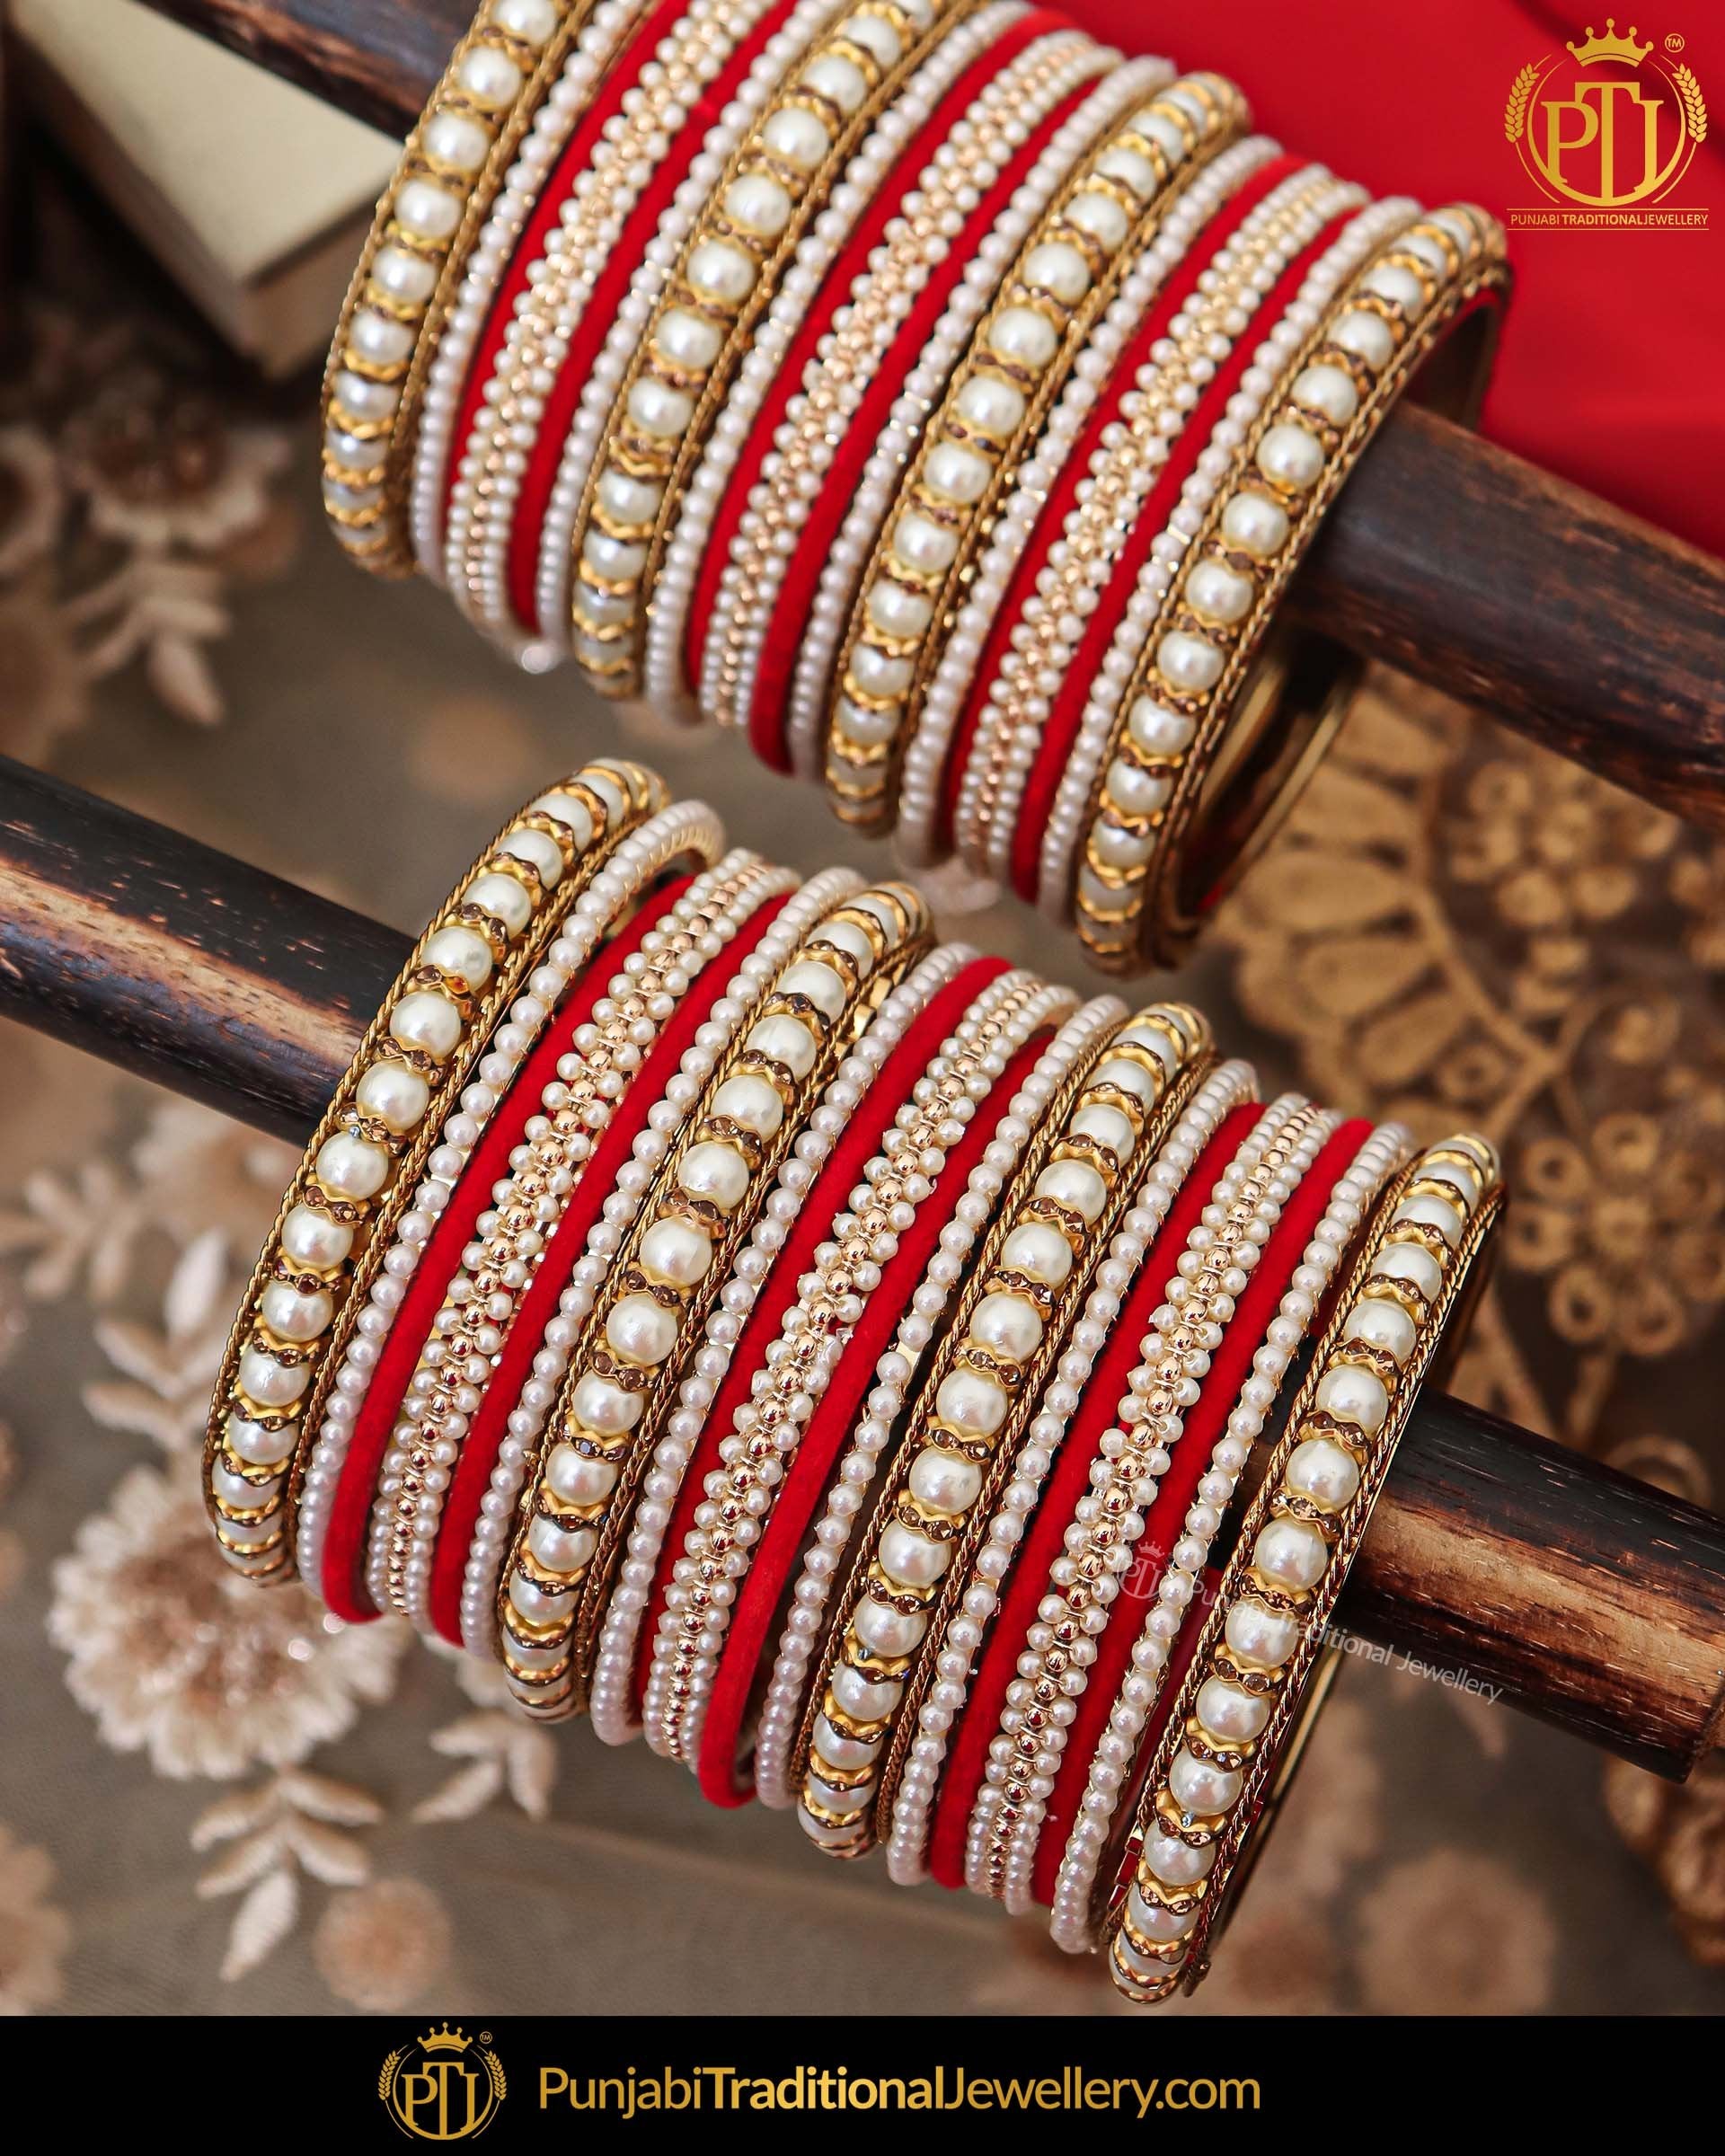 Antique Gold Rubby Pearl Bangles Set For Both Hands | Punjabi Traditional Jewellery Exclusive